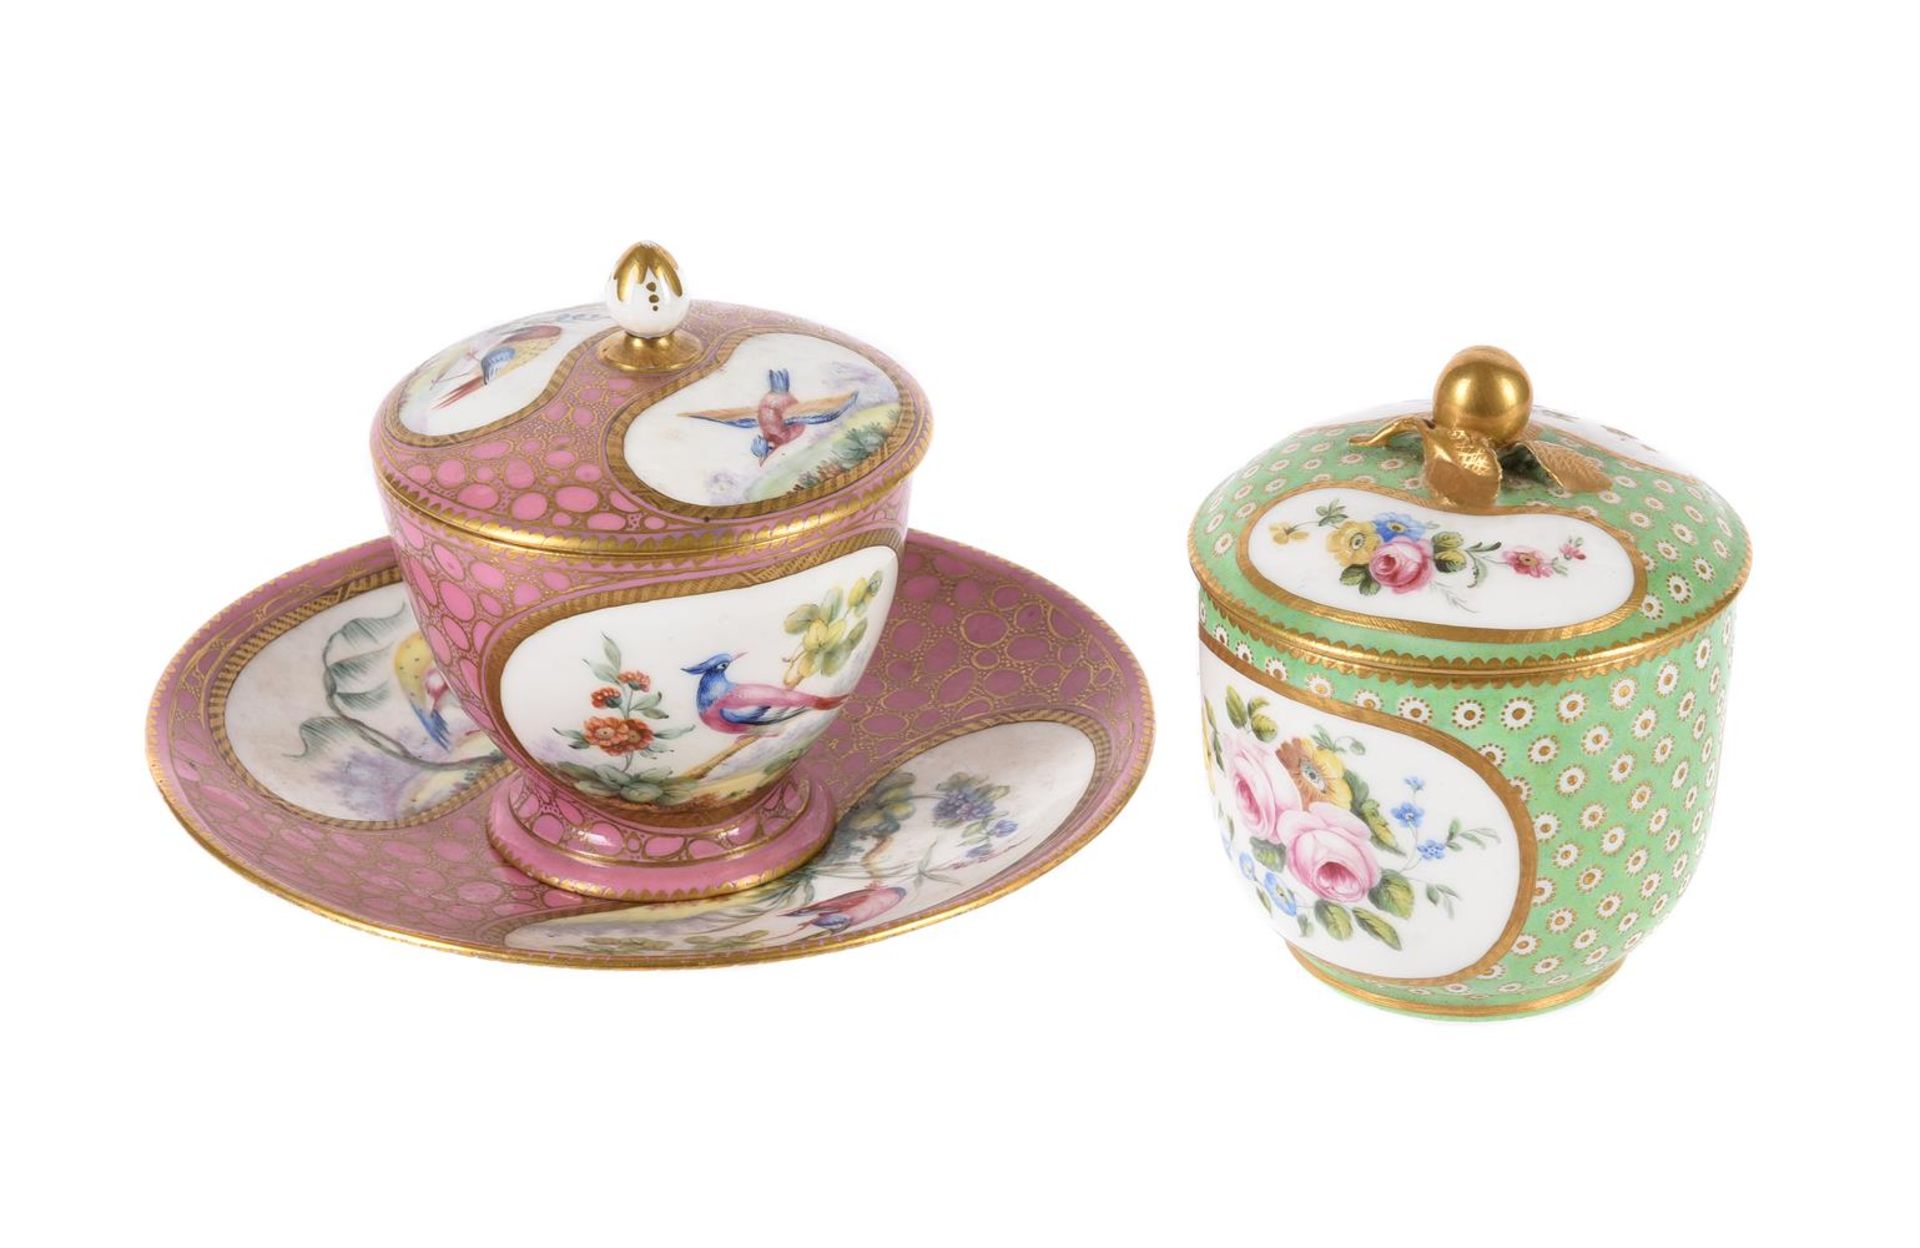 A SEVRES-STYLE GREEN AND OEIL DE PERDRIX GROUND SUCRIER AND COVER AND A SEVRES STYLE PINK AND CAILLO